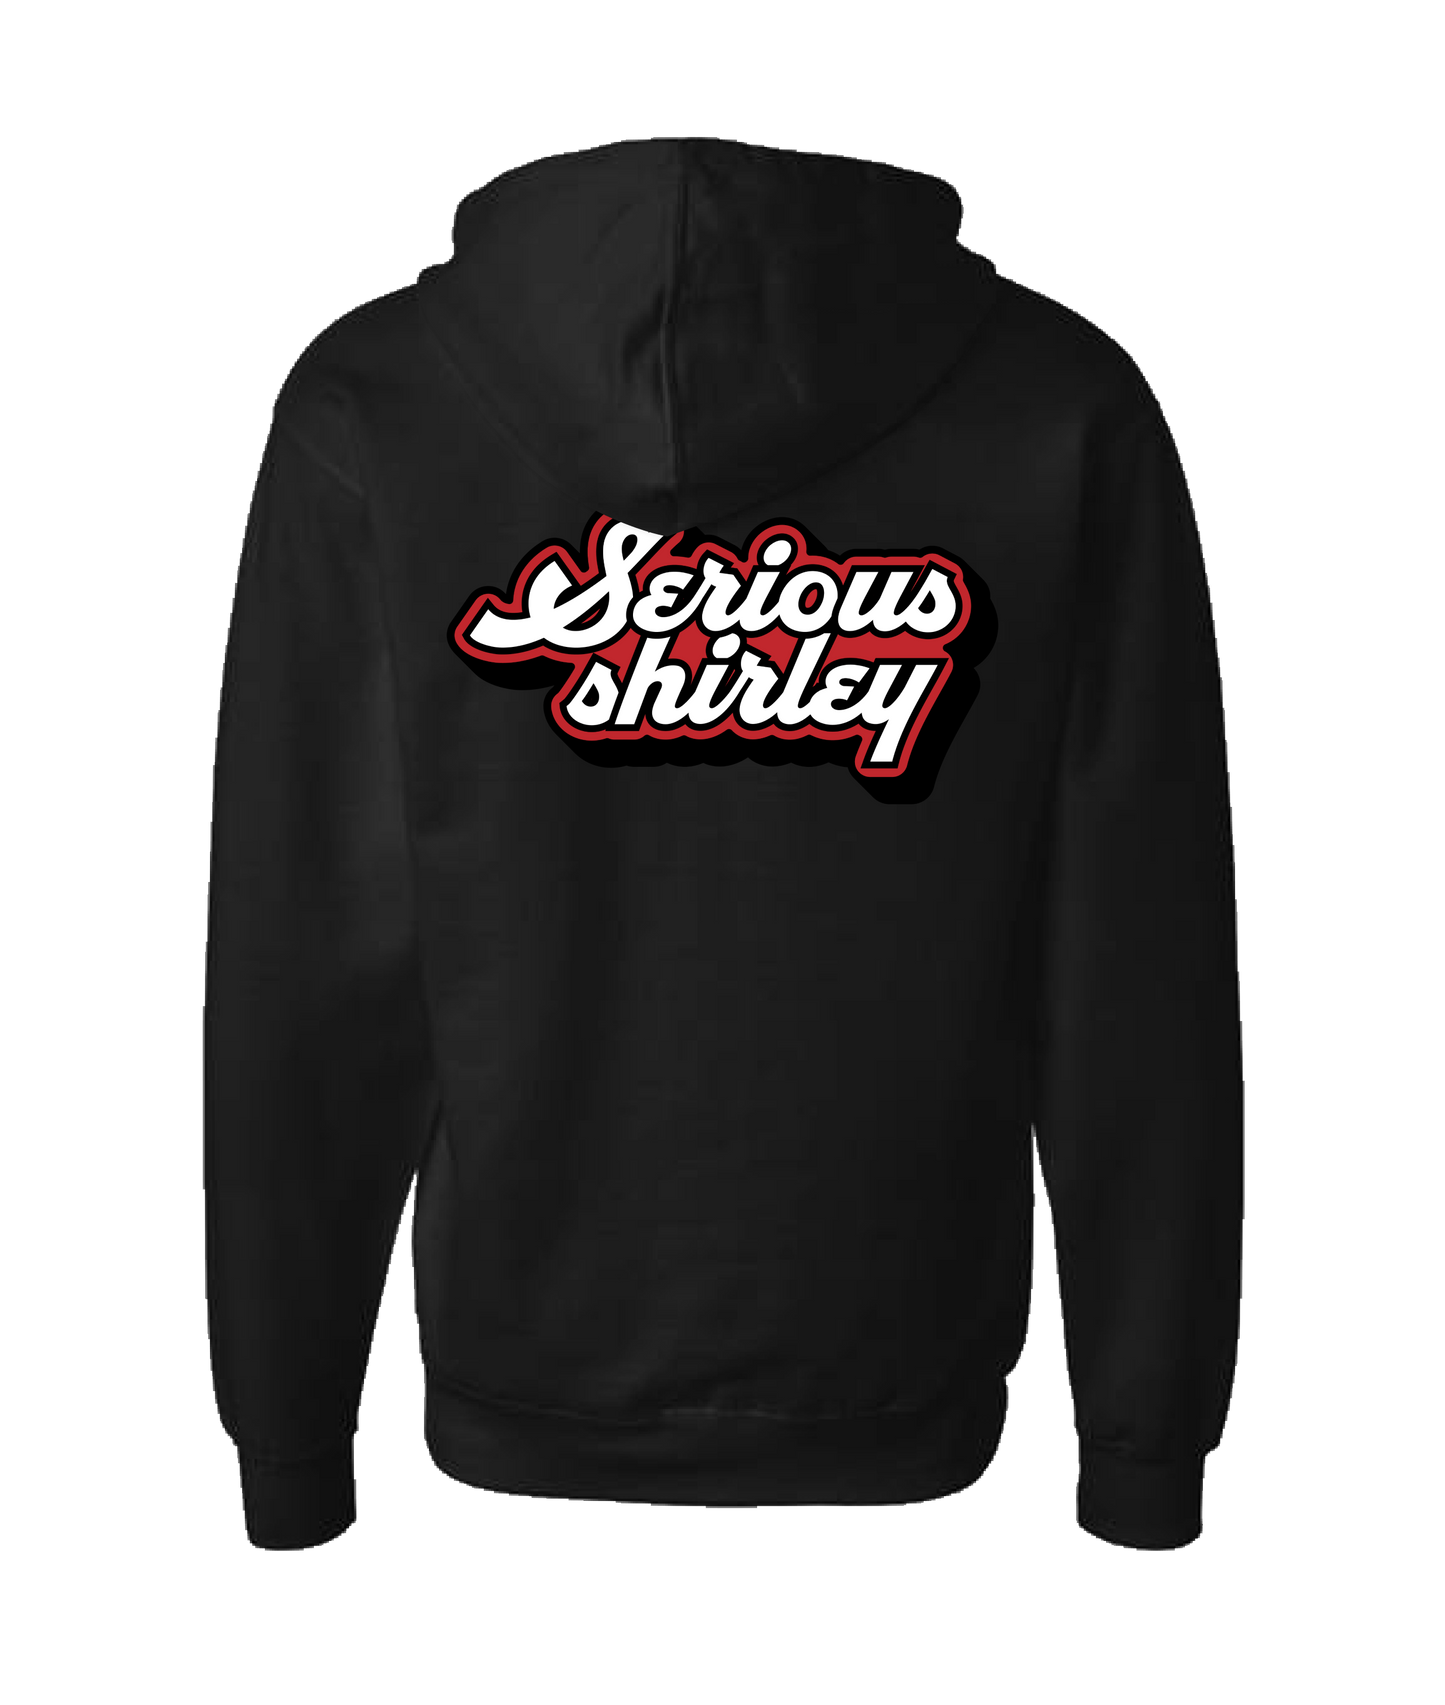 Serious Shirley - Red and White Logo - Black Zip Up Hoodie